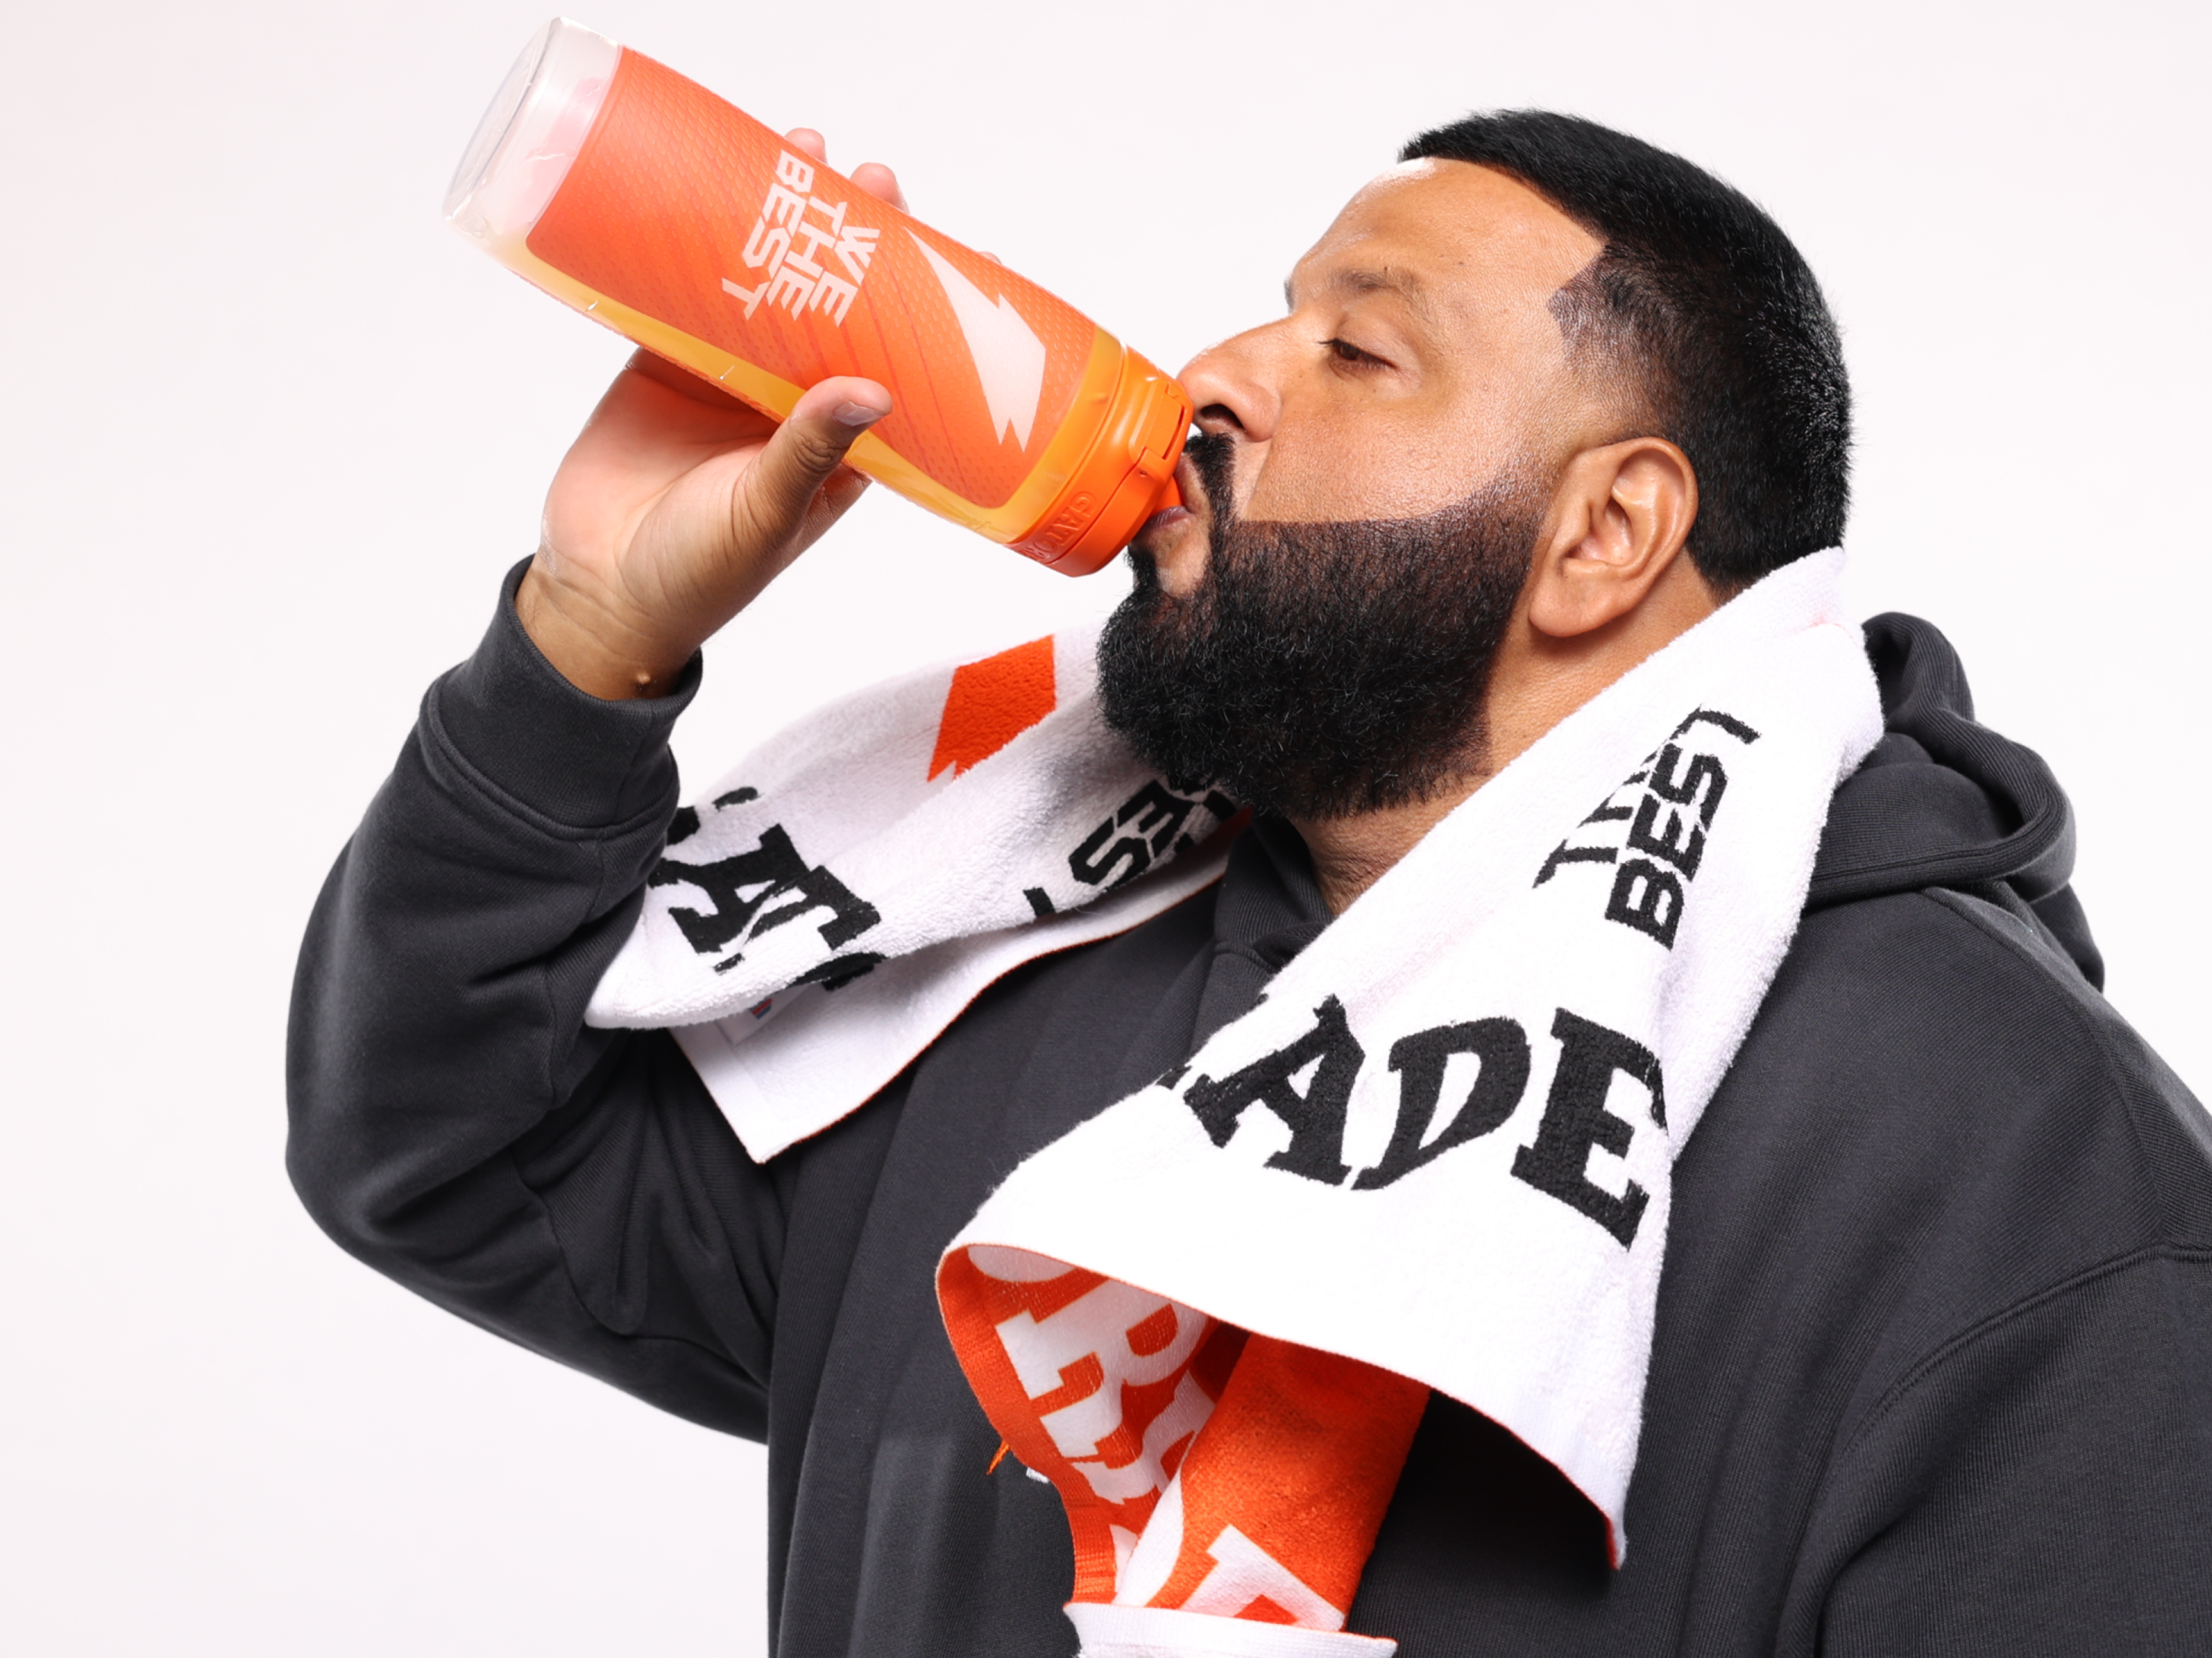 DJ Khaled drinking from "We the best" collaboration bottle